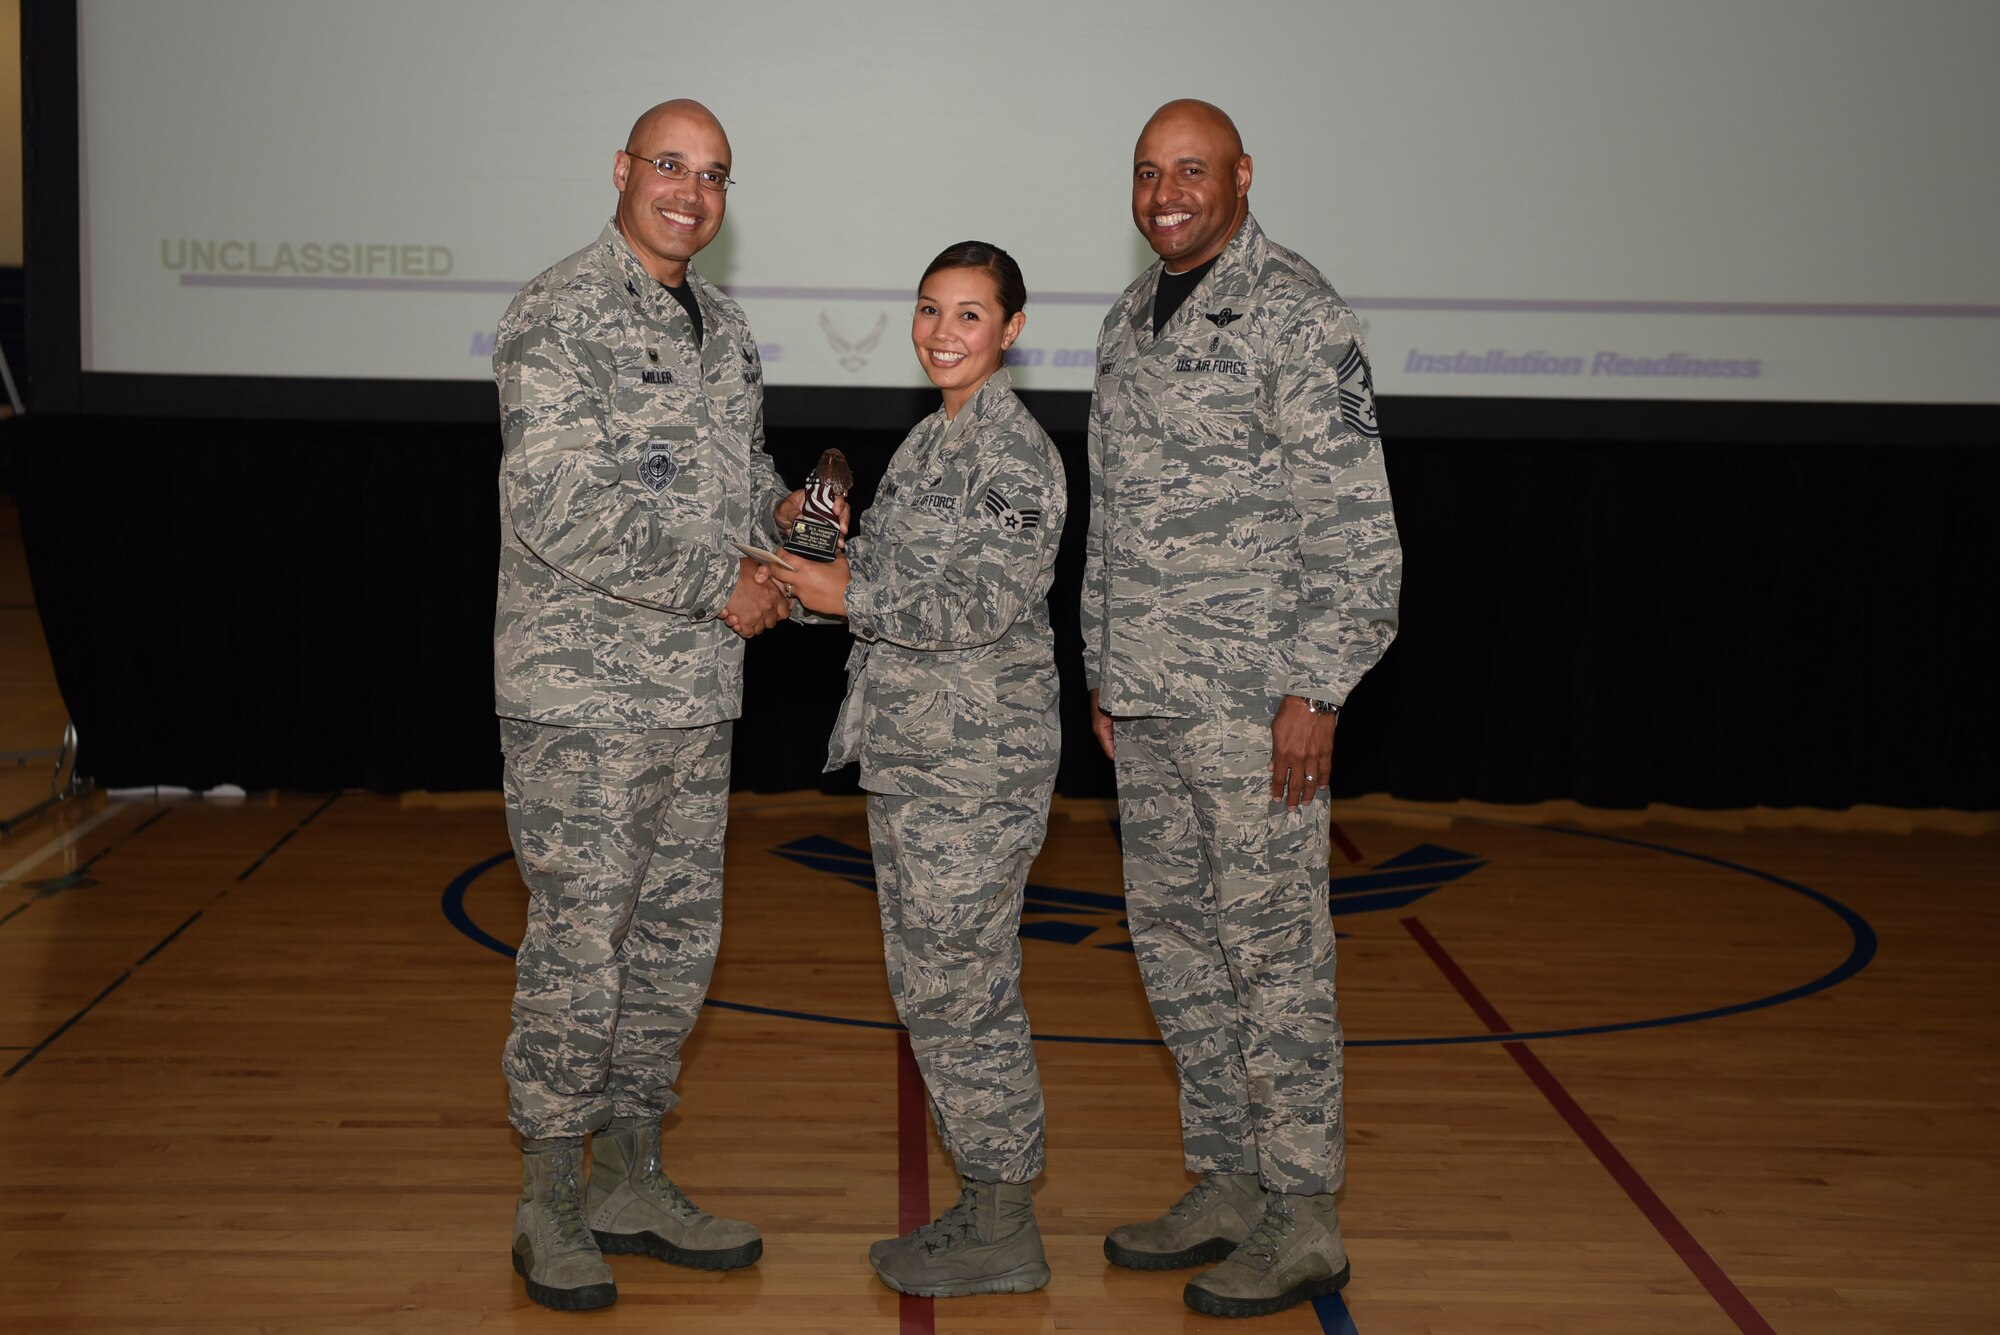 Senior Airman Amanda Kravchuk, 460th Space Wing general law paralegal, receives the Quarter Award May 19, 2017, on Buckley Air Force Base, Colo.  Awards were given to the Team Buckley members who showed dedication, hard work and exceeded their supervisor’s expectations. (U.S. Air Force photo by Airman 1st Class Holden S. Faul/ released)